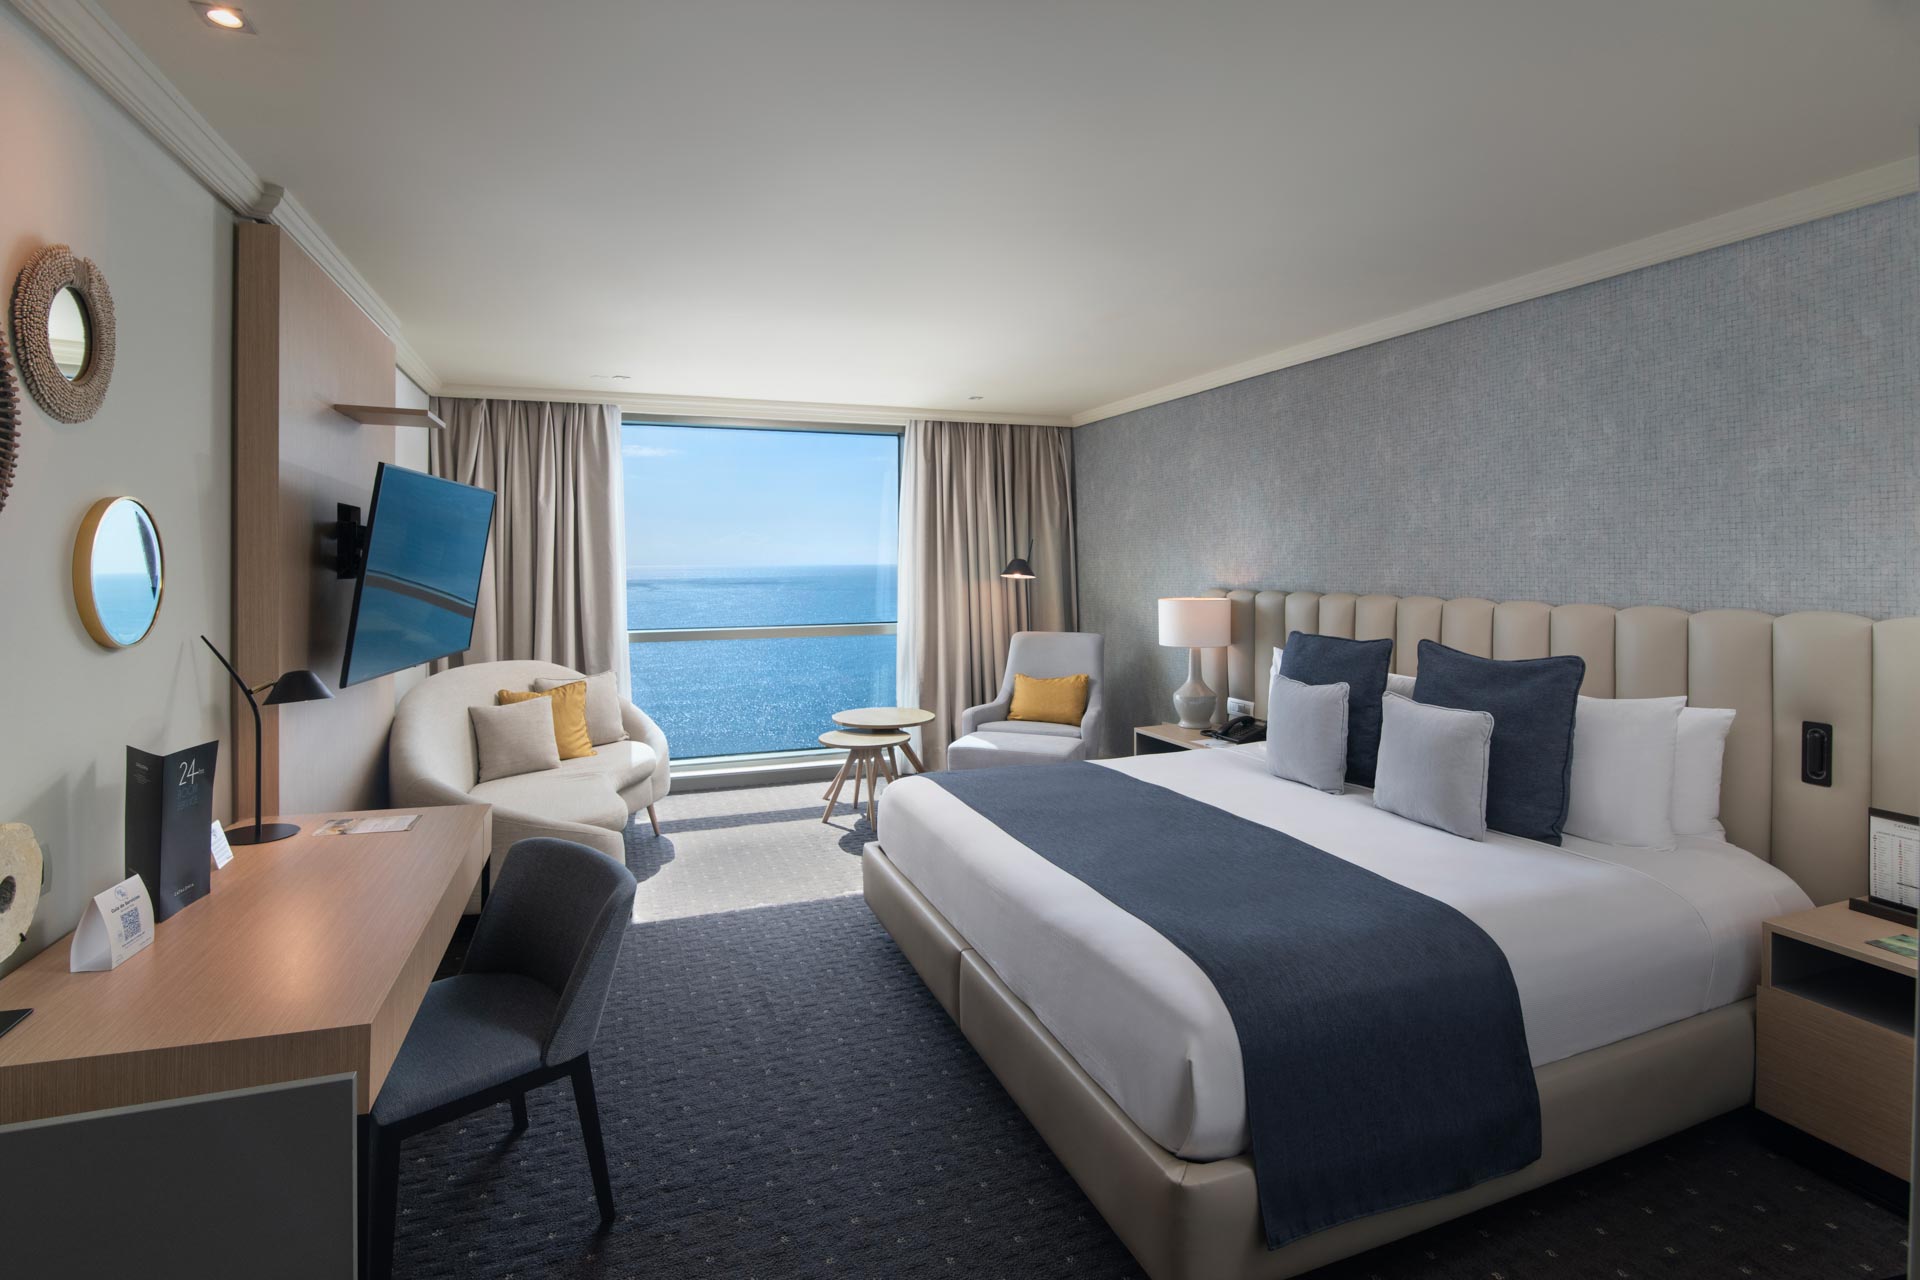 Premium ocean front guest accommodation